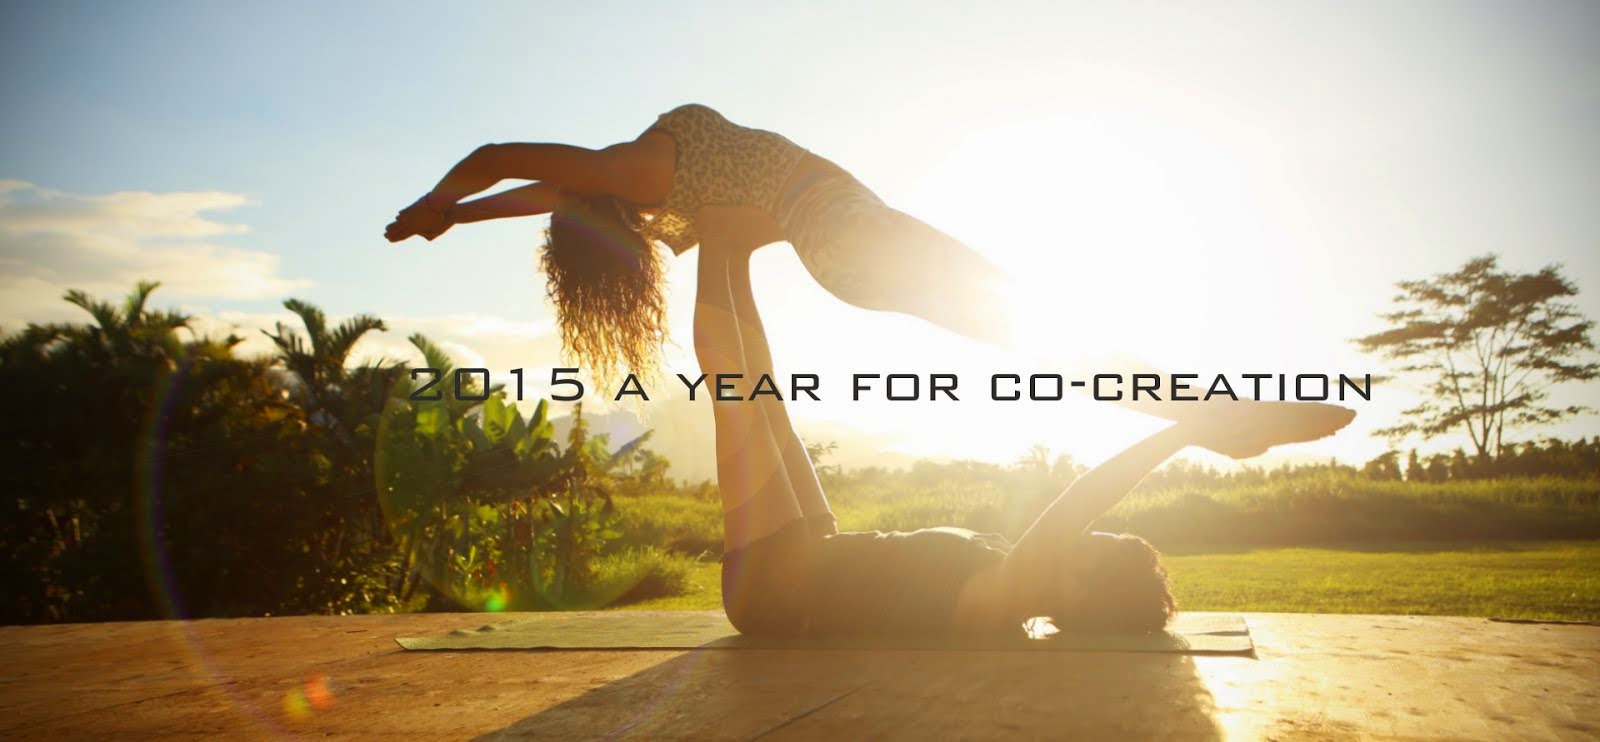 2015 a Year for Co-creation